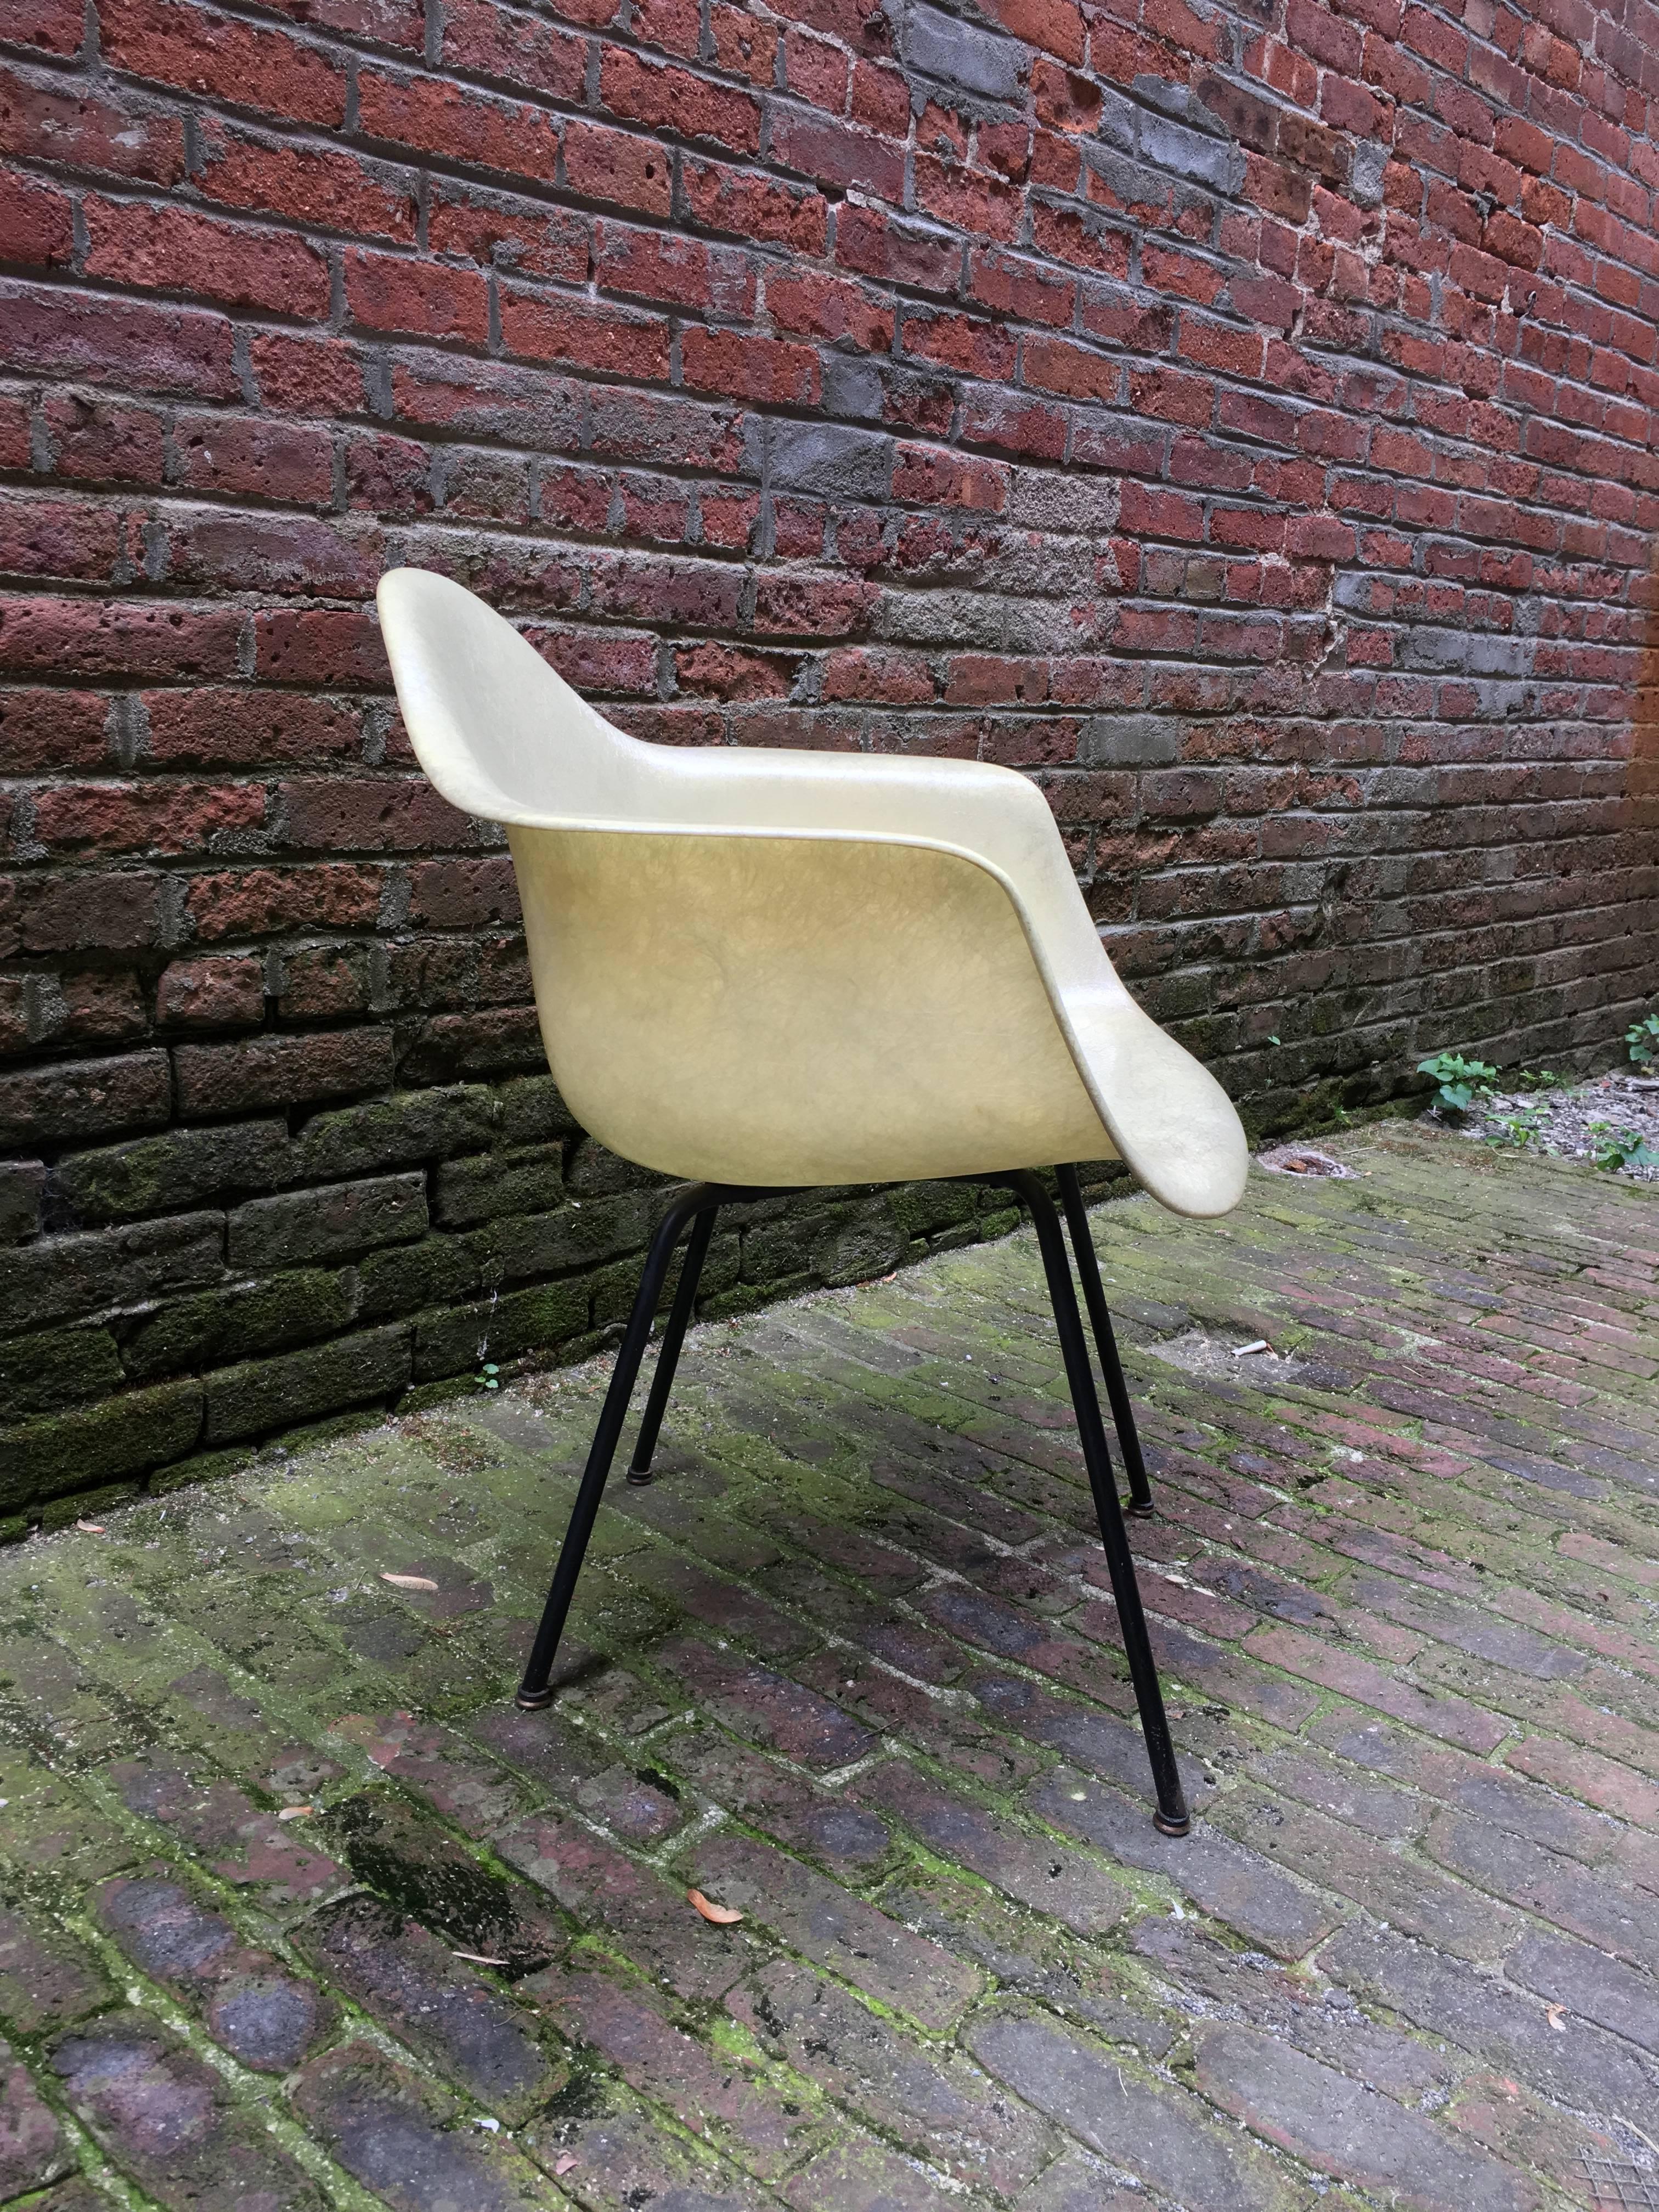 Early Parchment Eames rope edge DAX fiberglass shell chair, circa 1956-1959. Very good original condition with some shock mount bleed and some minor paint loss on the legs. Unsigned. Retains all its original glides. Measures: Seat height is 17